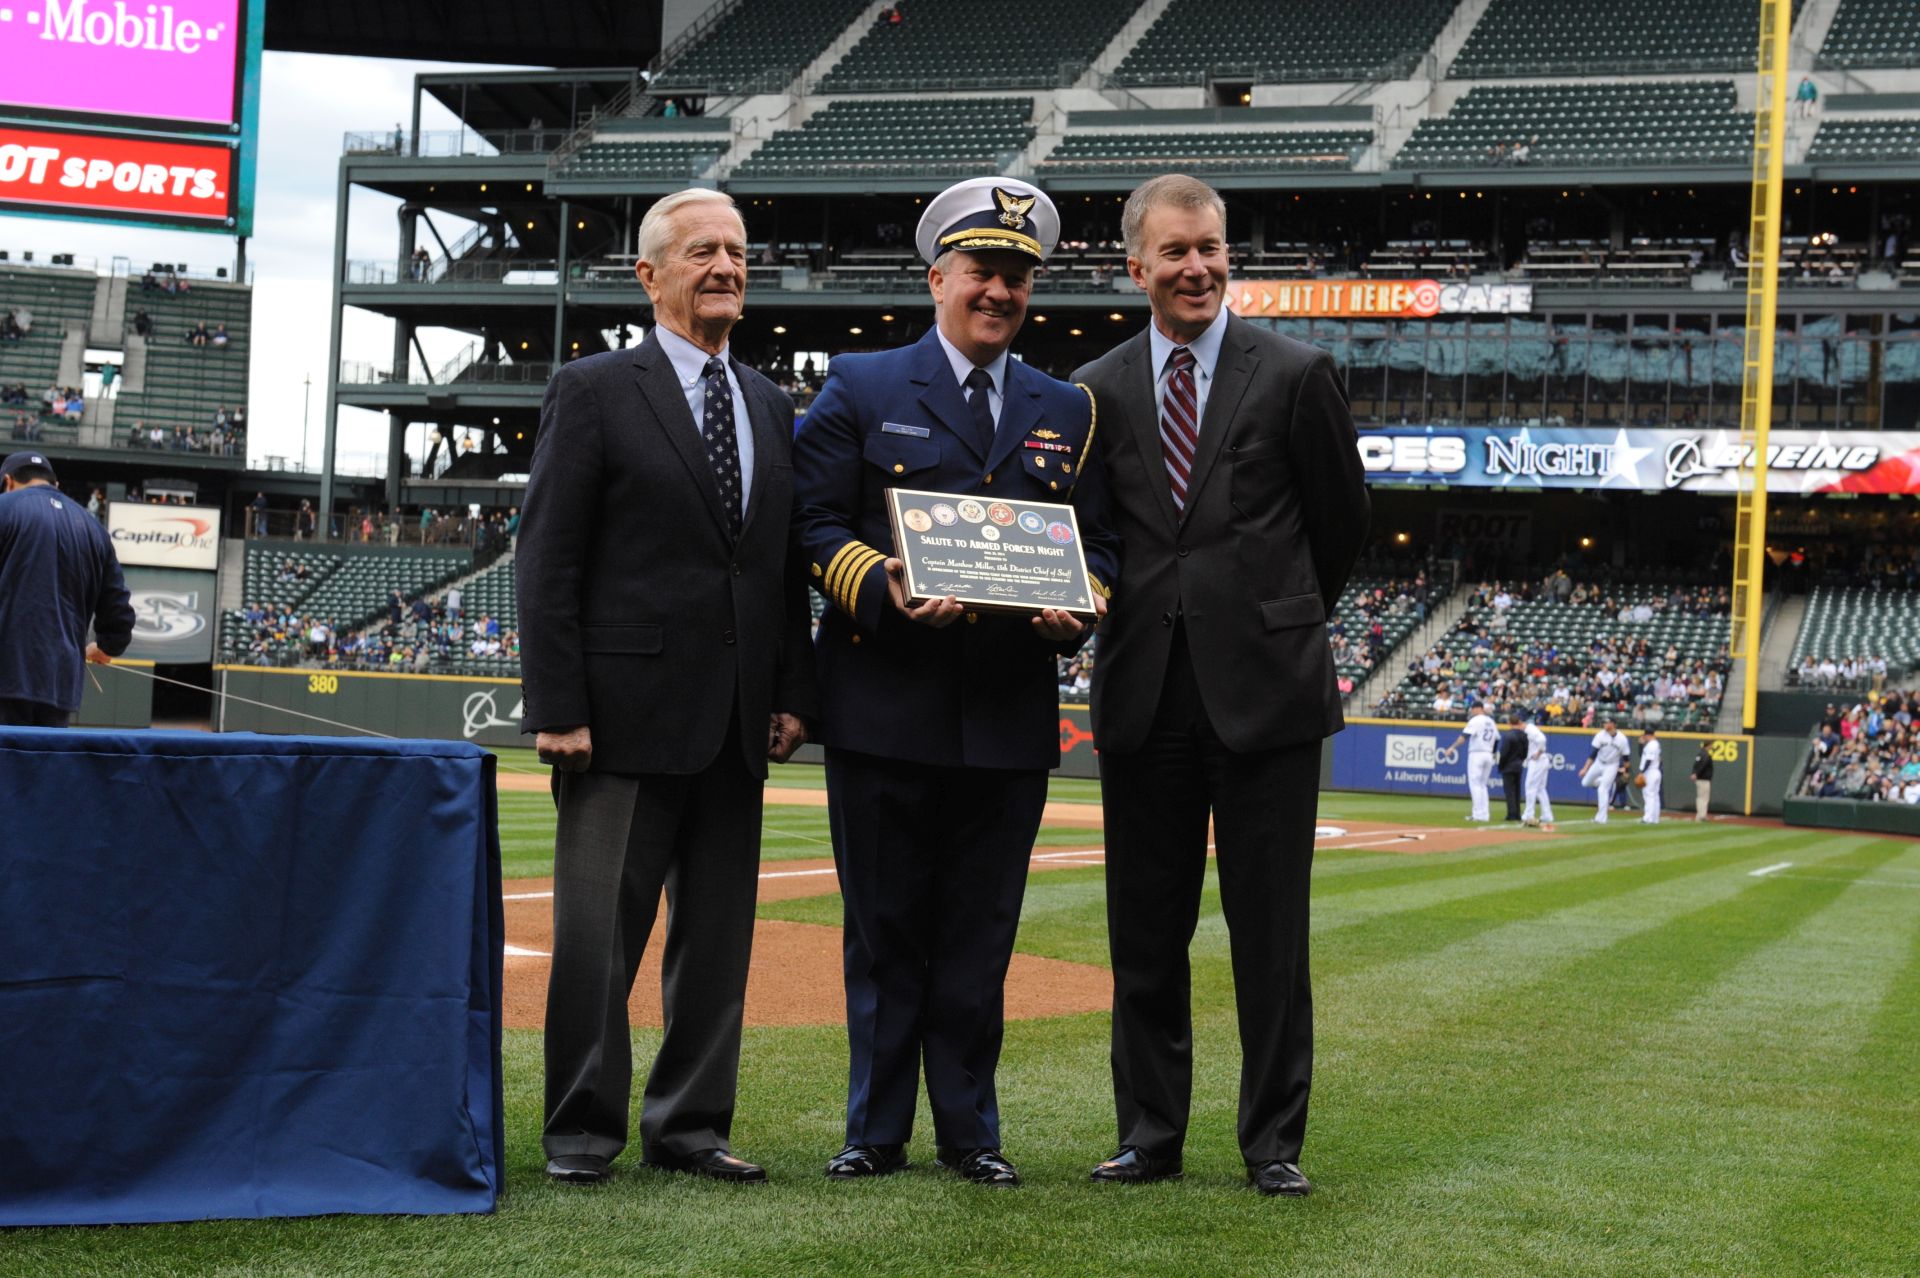 Seattle Mariners Salute to the Armed Forces 2014